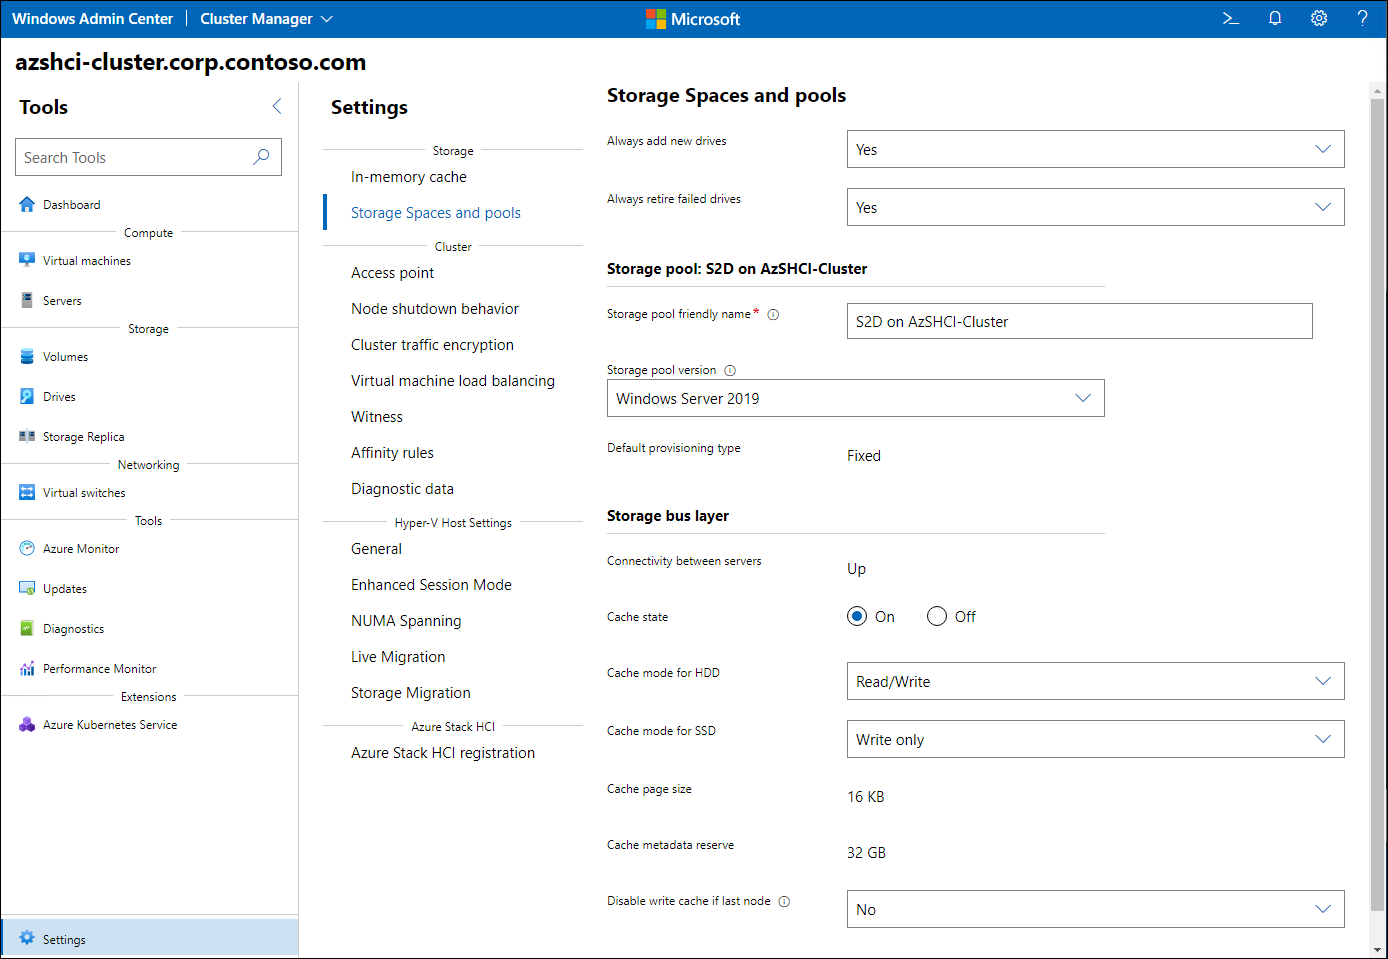 The screenshot depicts the Storage Spaces Direct persistent cache settings for an Azure Stack HCI cluster.